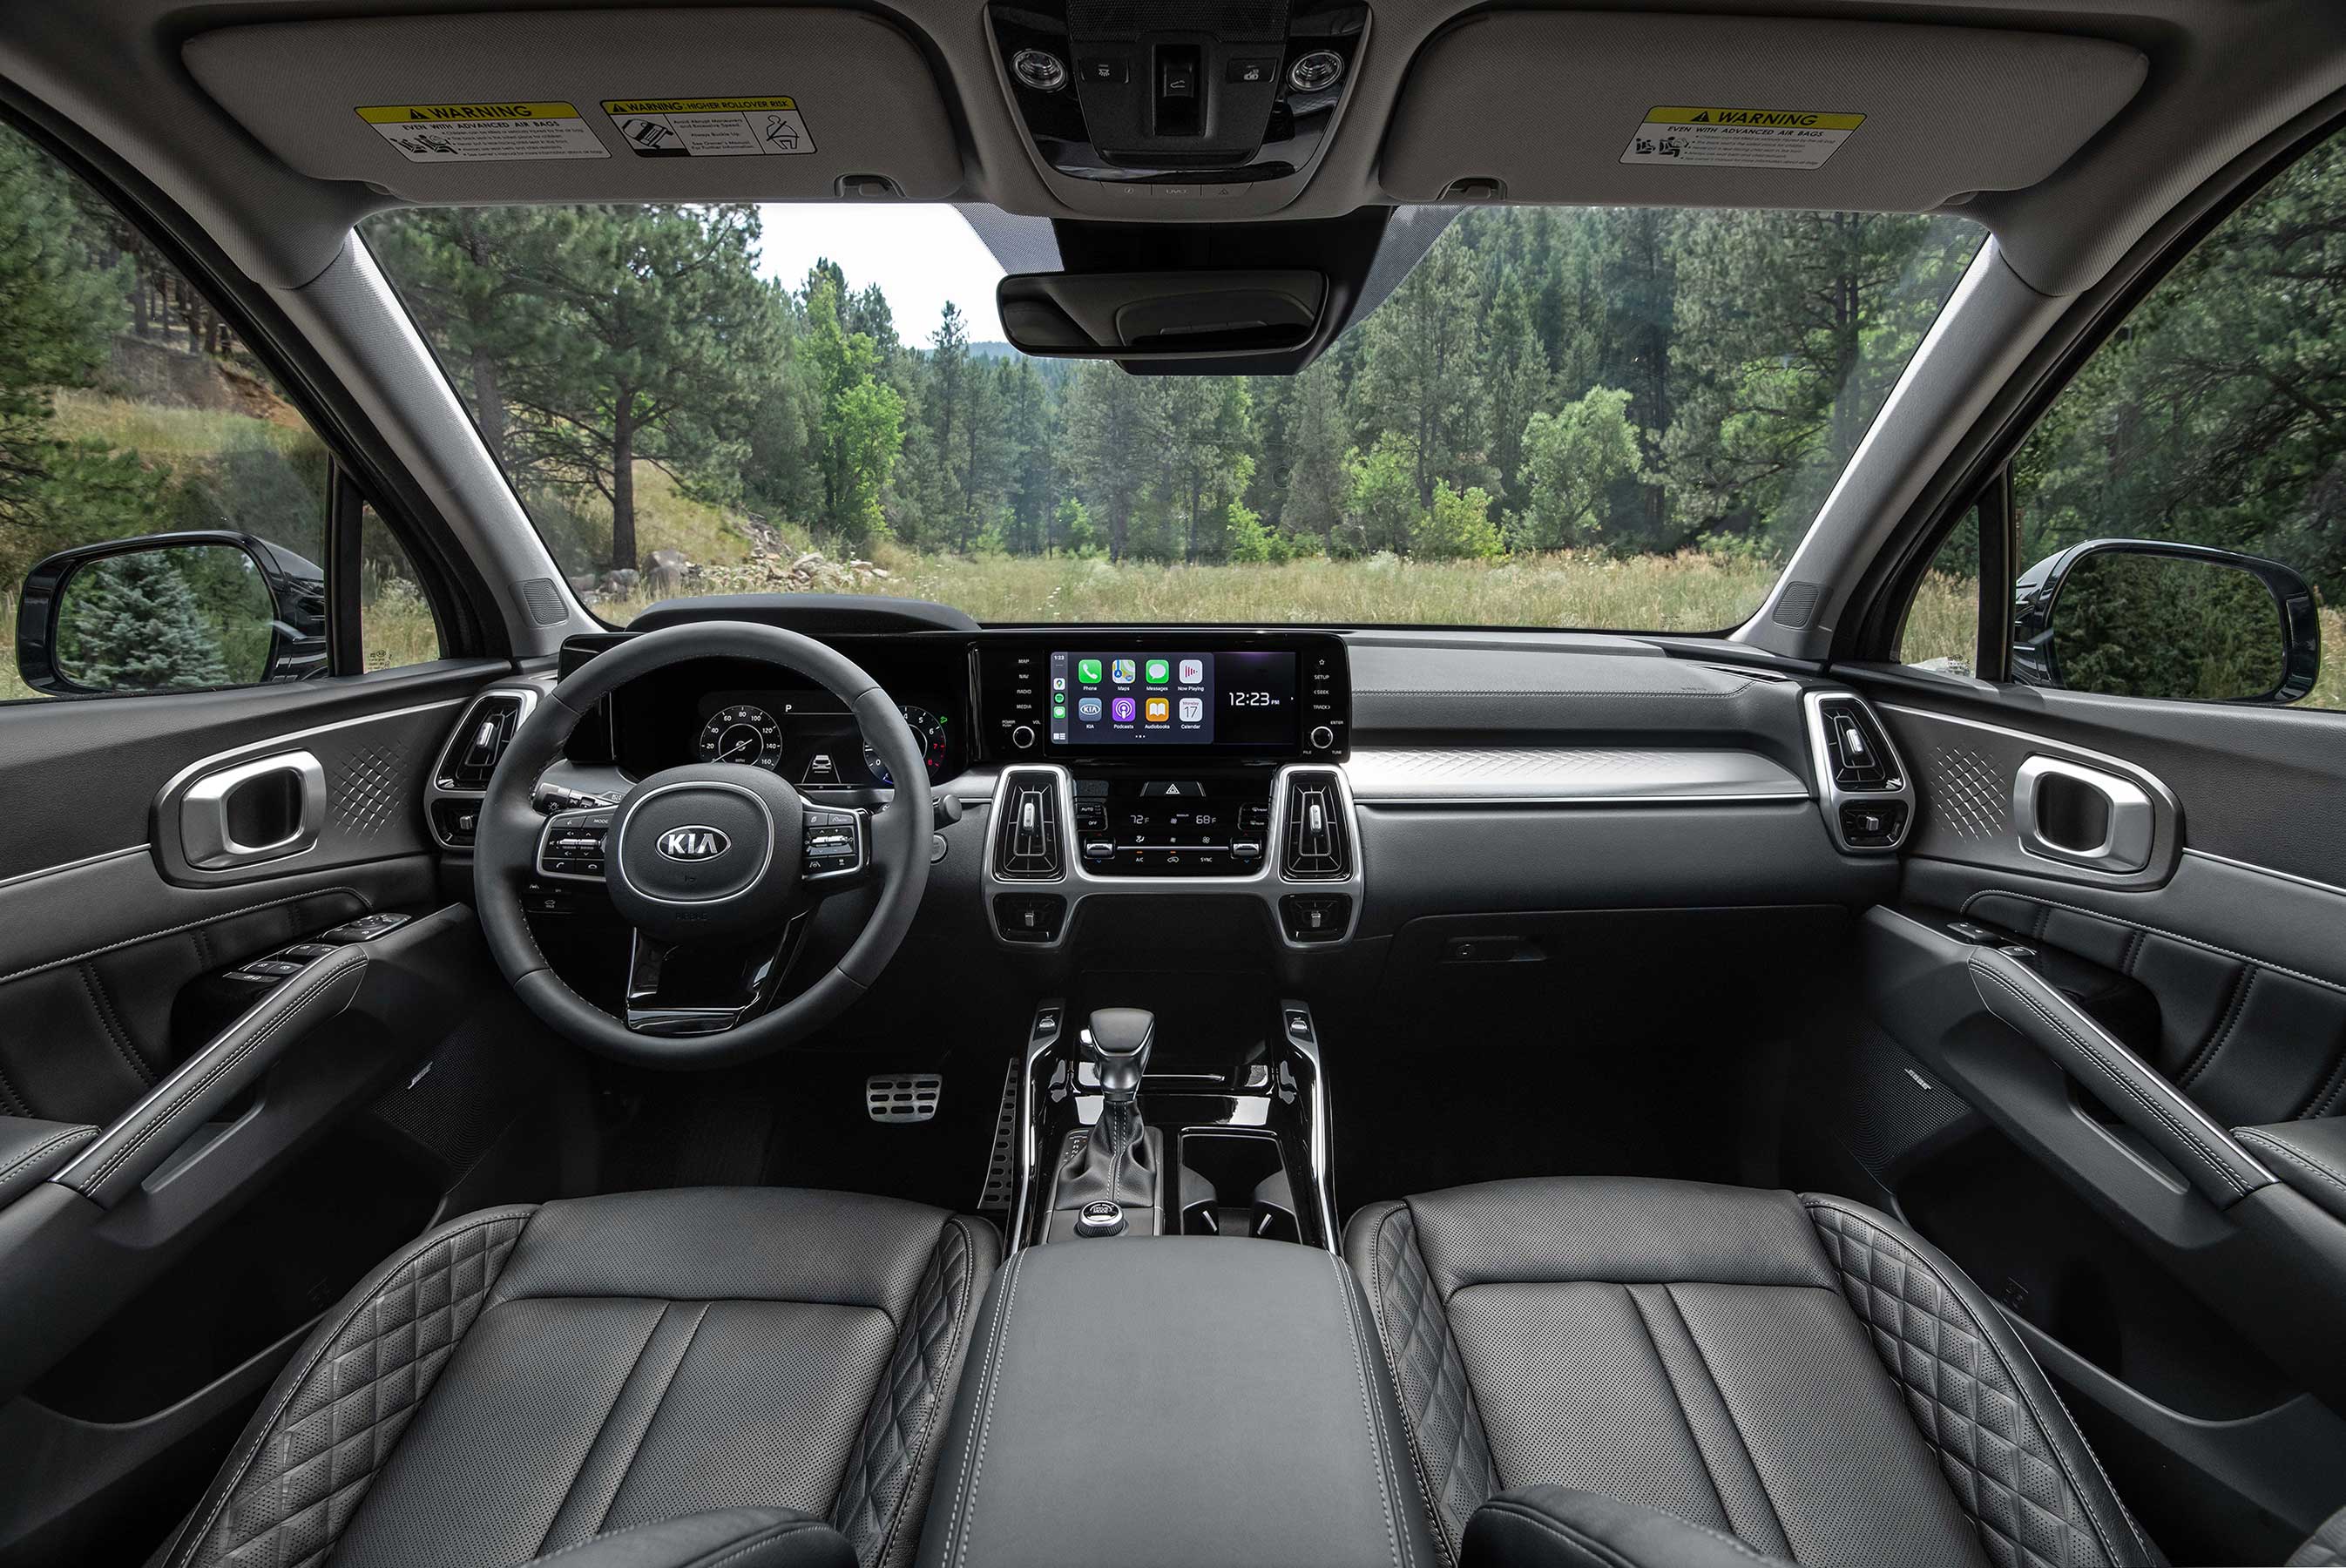 All-new 2021 Kia Sorento delivers best-in-class front/rear legroom and overall interior passenger volume